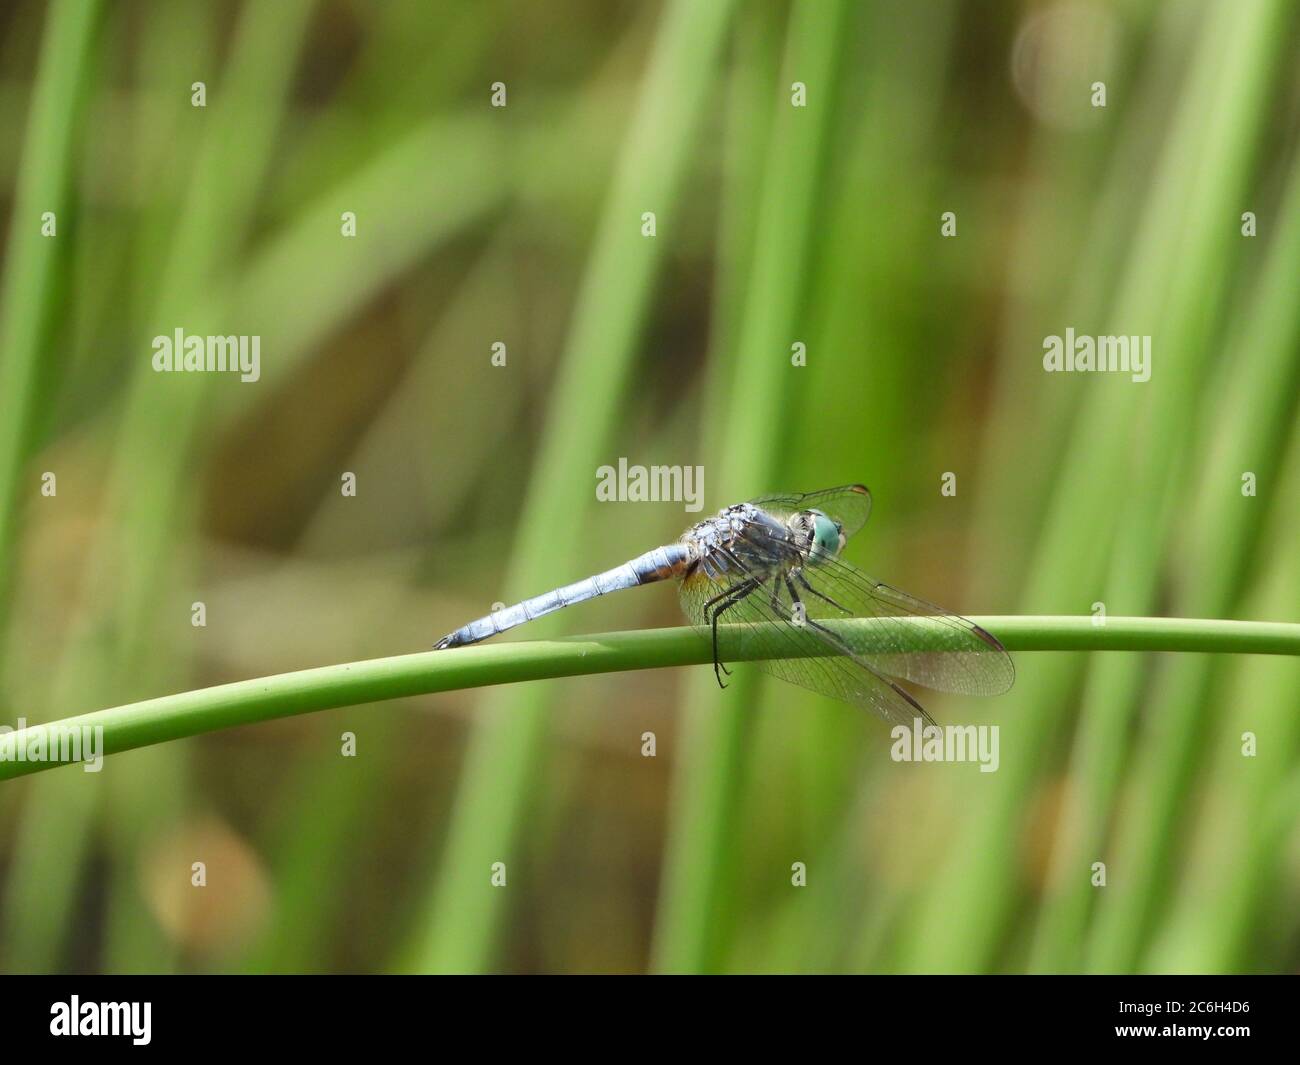 Brown Canyon Ranch July 9, 2020 - Dragonfly 2 Stock Photo